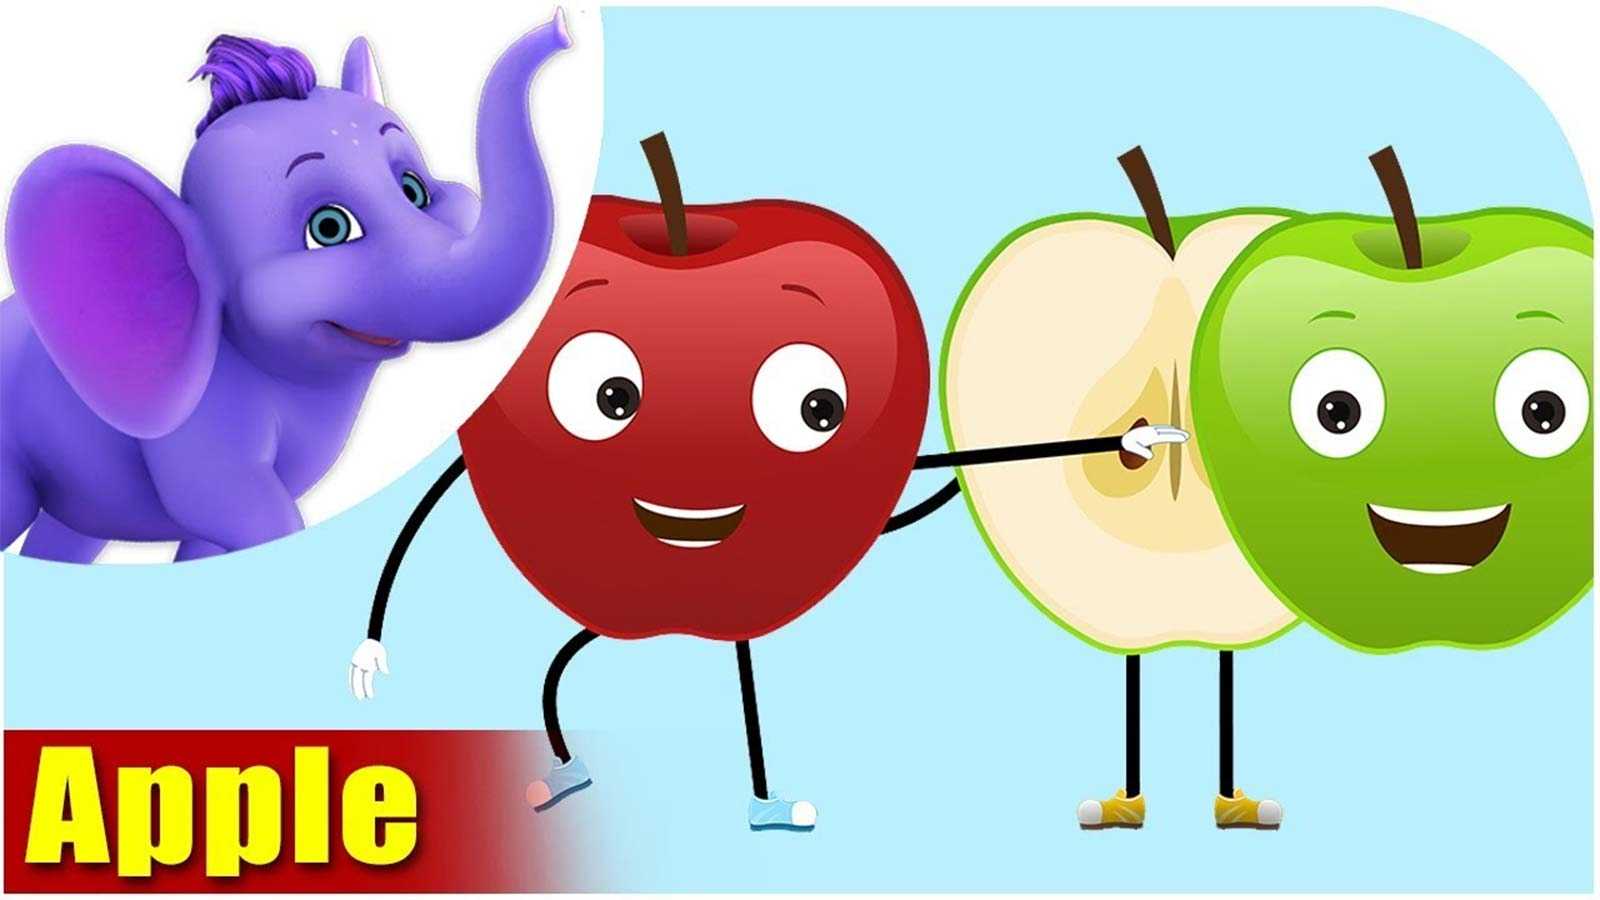 Children Popular Rhyme'Safarchand - Apple' - Fruit Rhyme in Marathi |  Entertainment - Times of India Videos